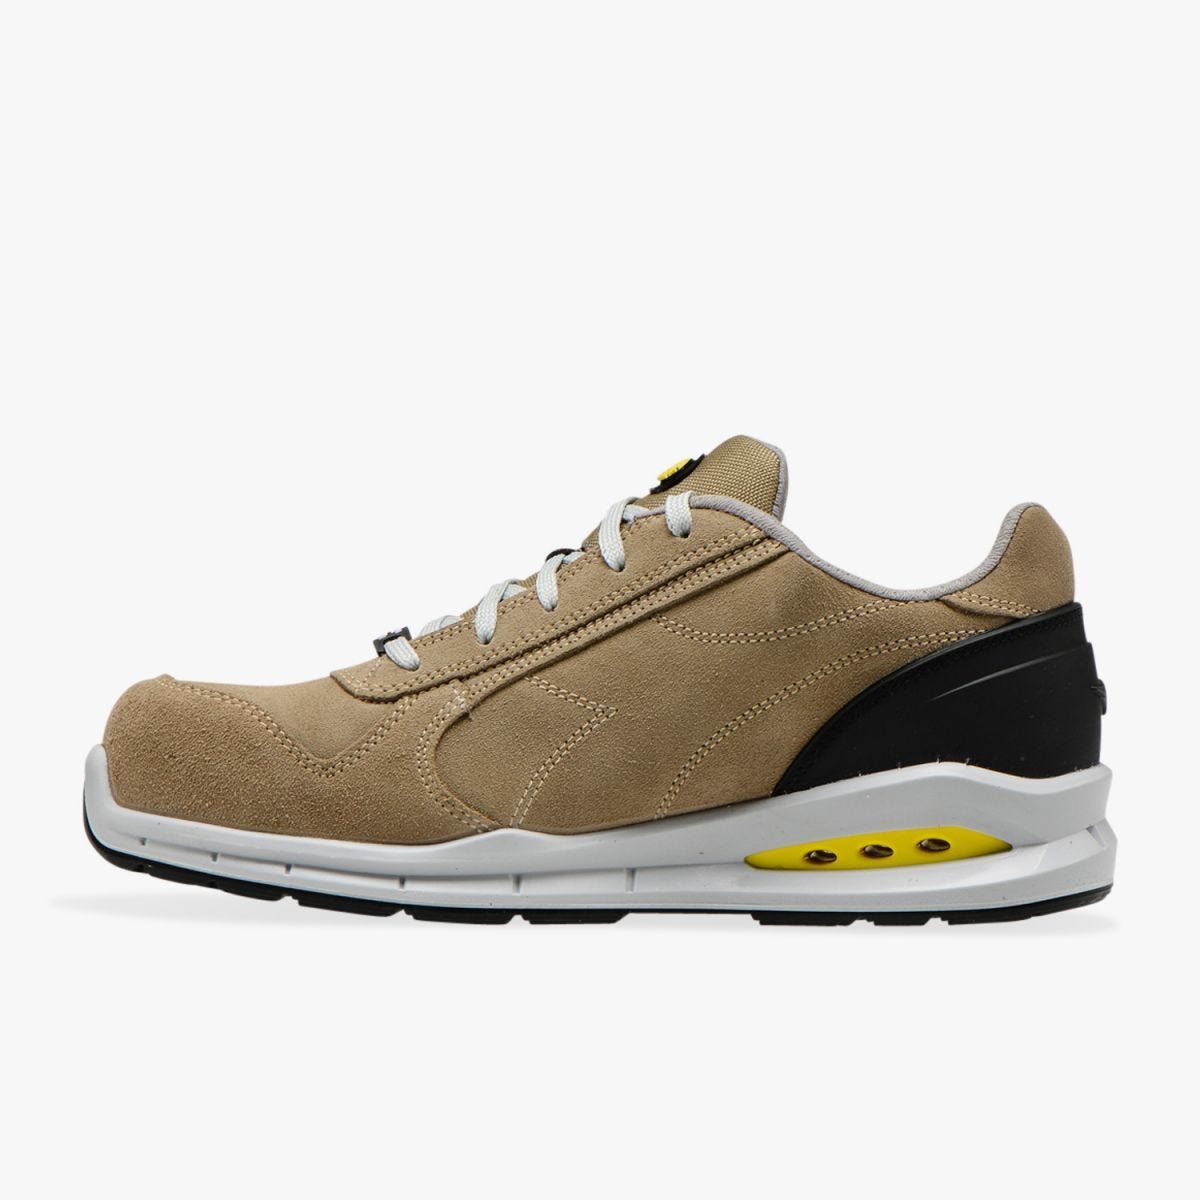 CHAUSSURE SECURITE RUN NET AIRBOX LOW S3 SRC TAUPE/TAUPE - Diadora - Taille 41 1